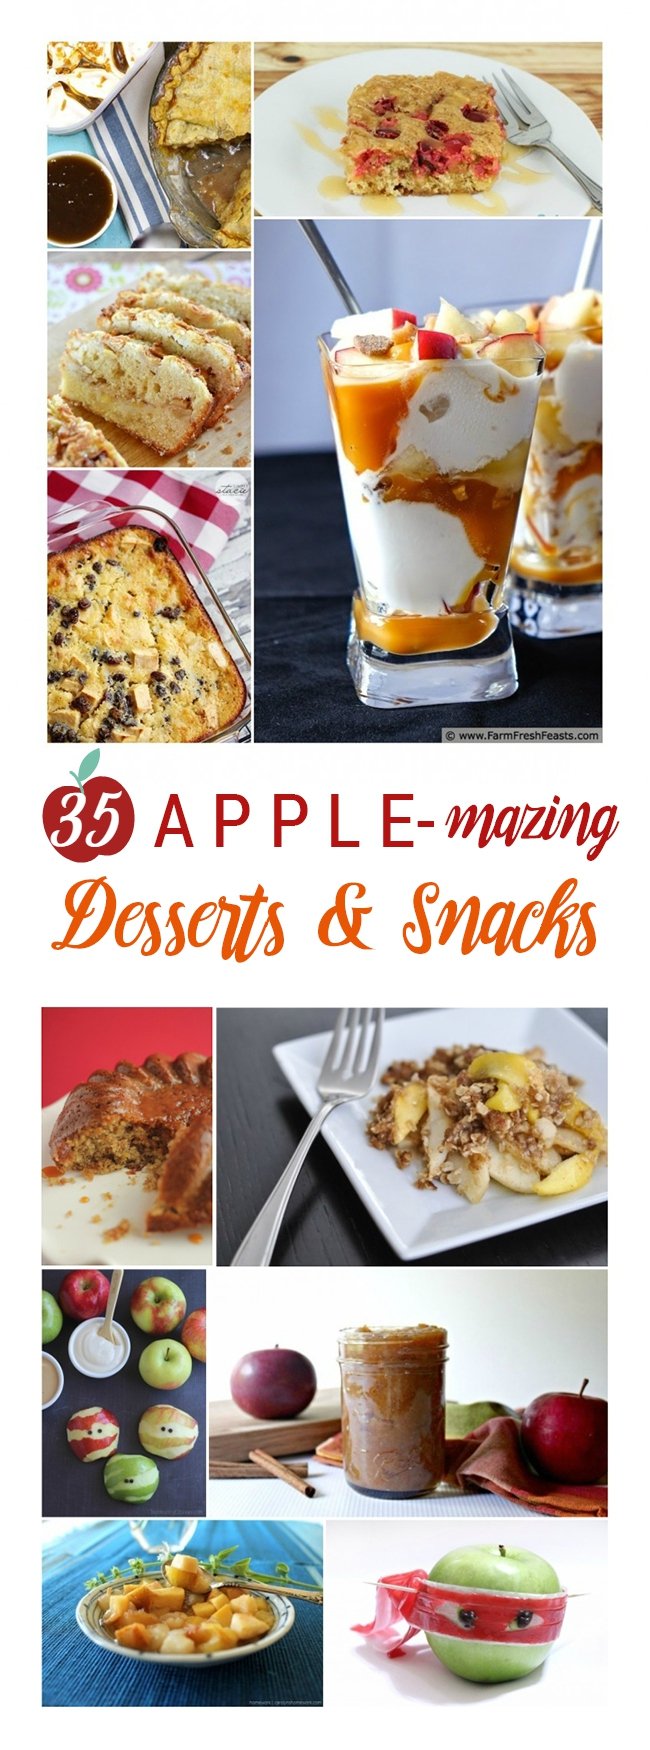 35 Amazing Desserts and Snacks Using Apples